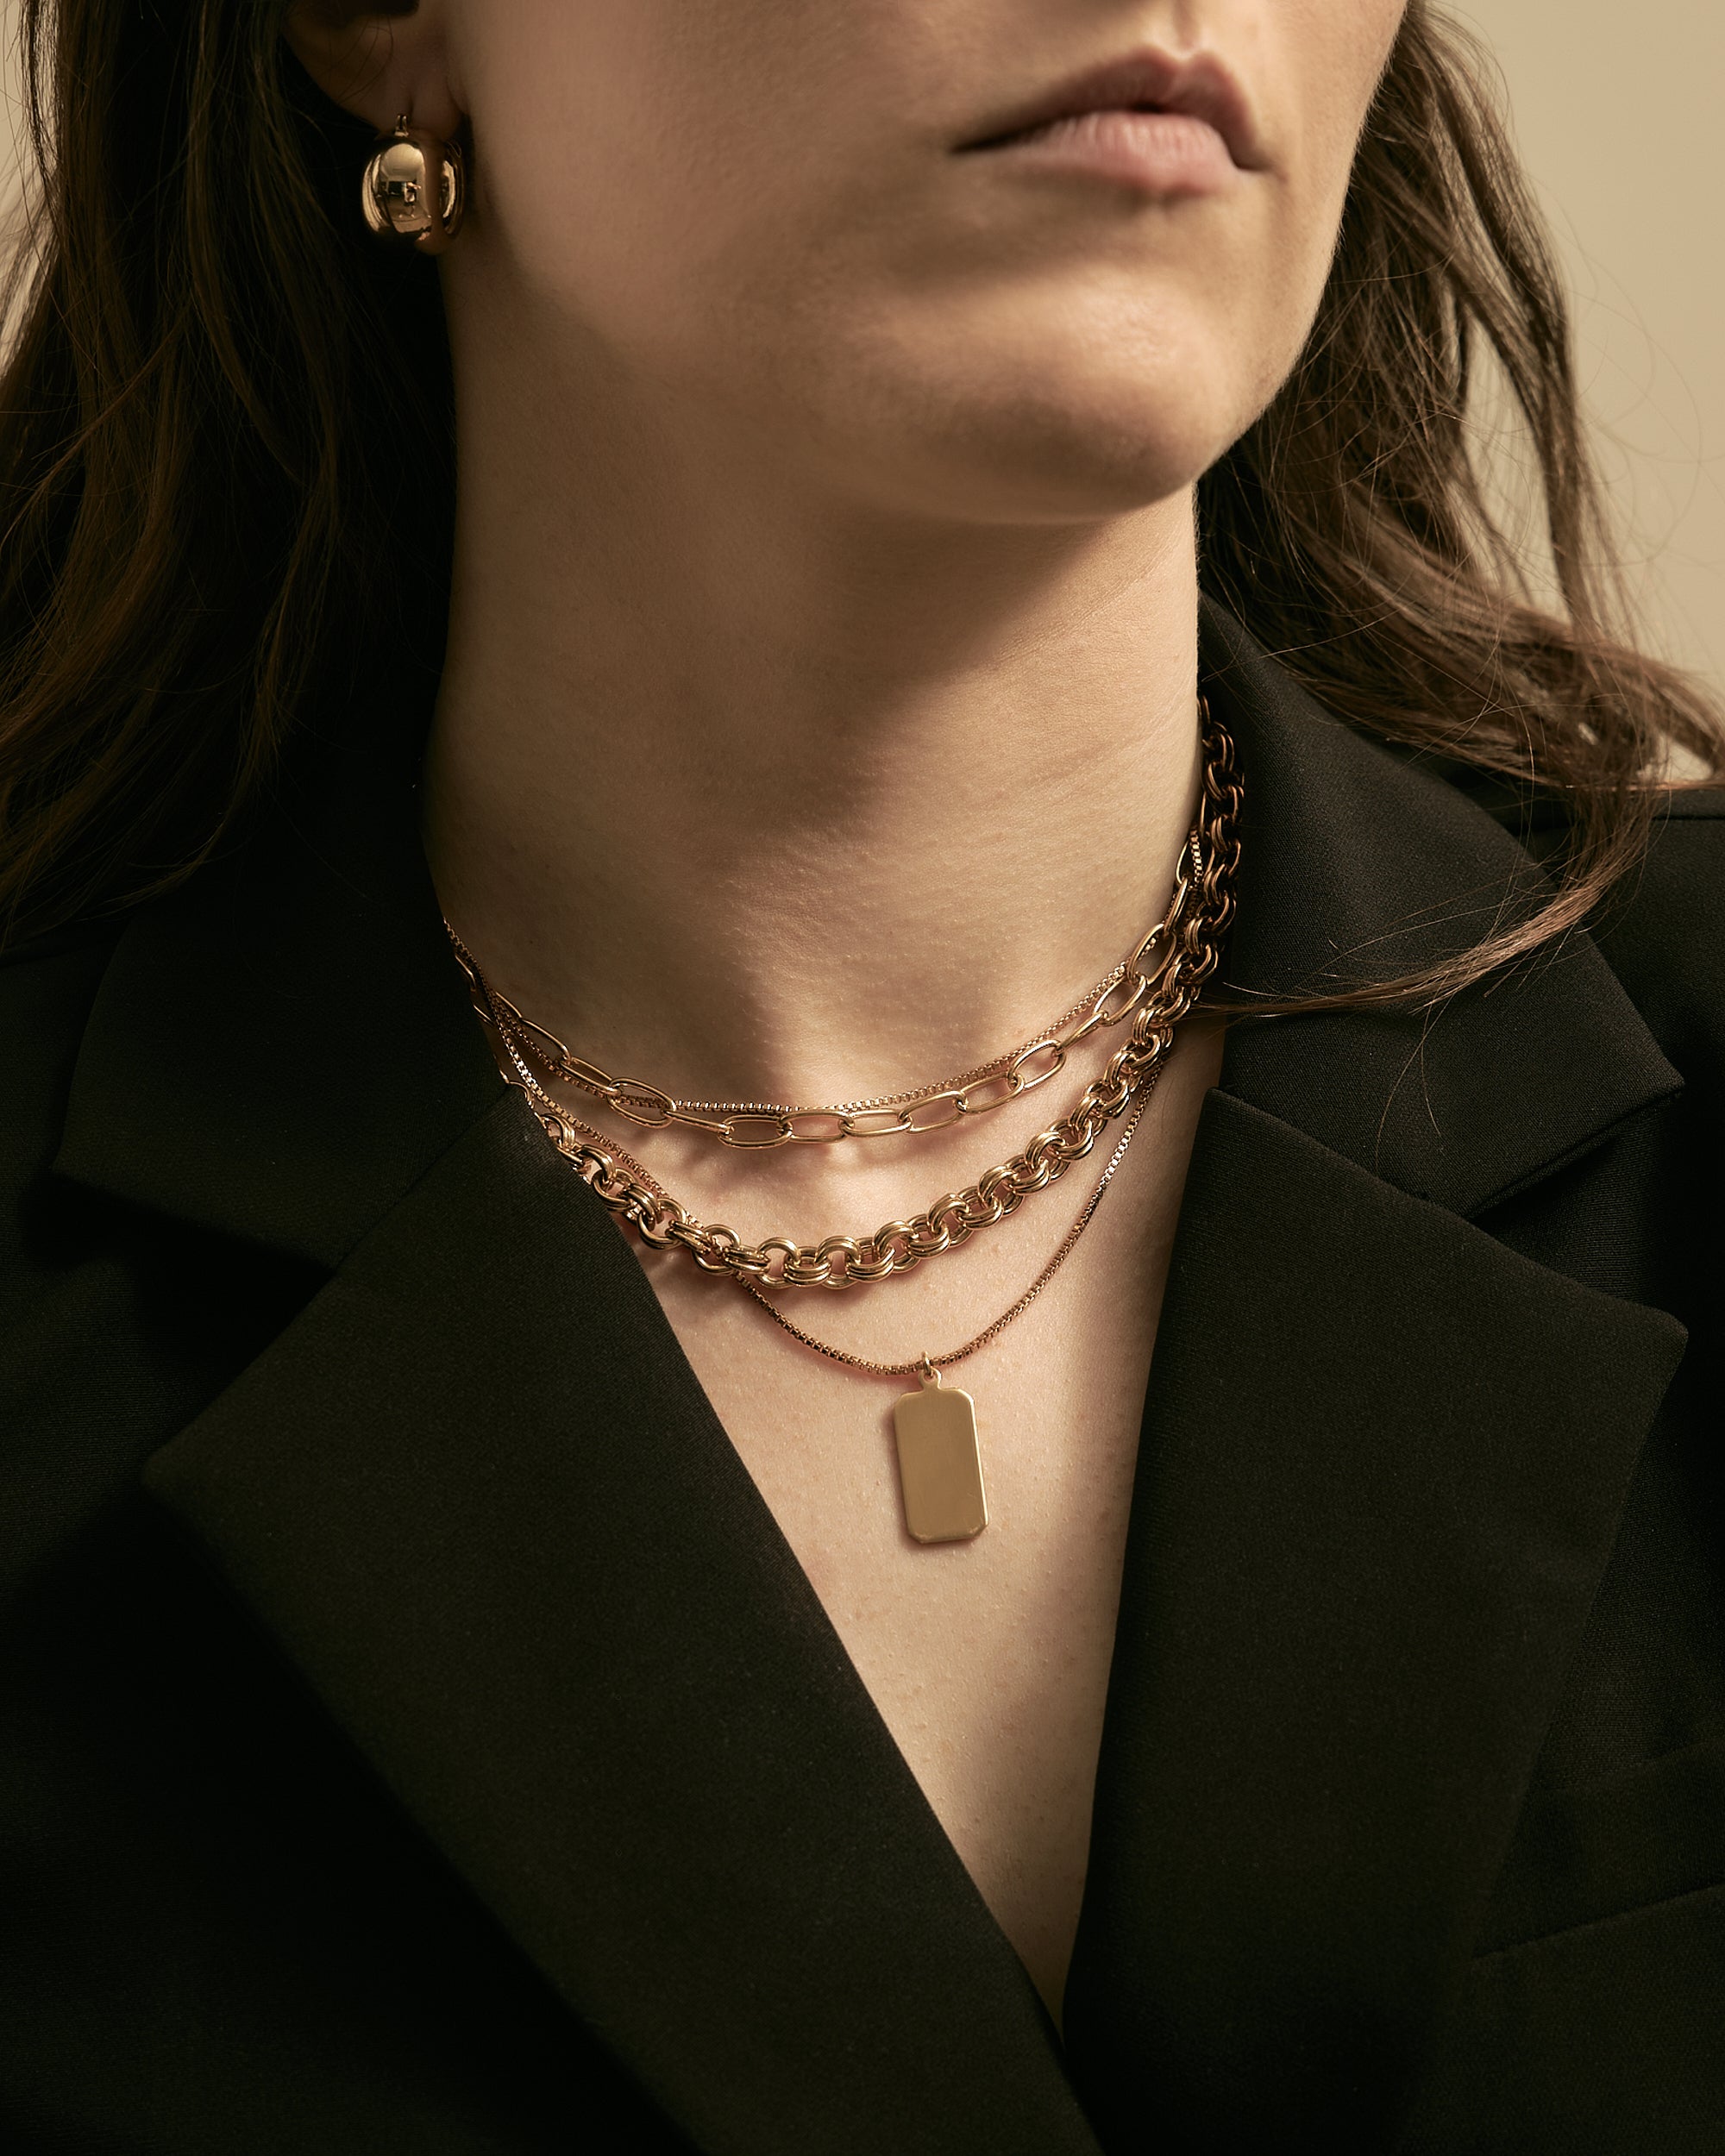 Close up of chain necklaces, one with a pendant and earrings on a white femme model